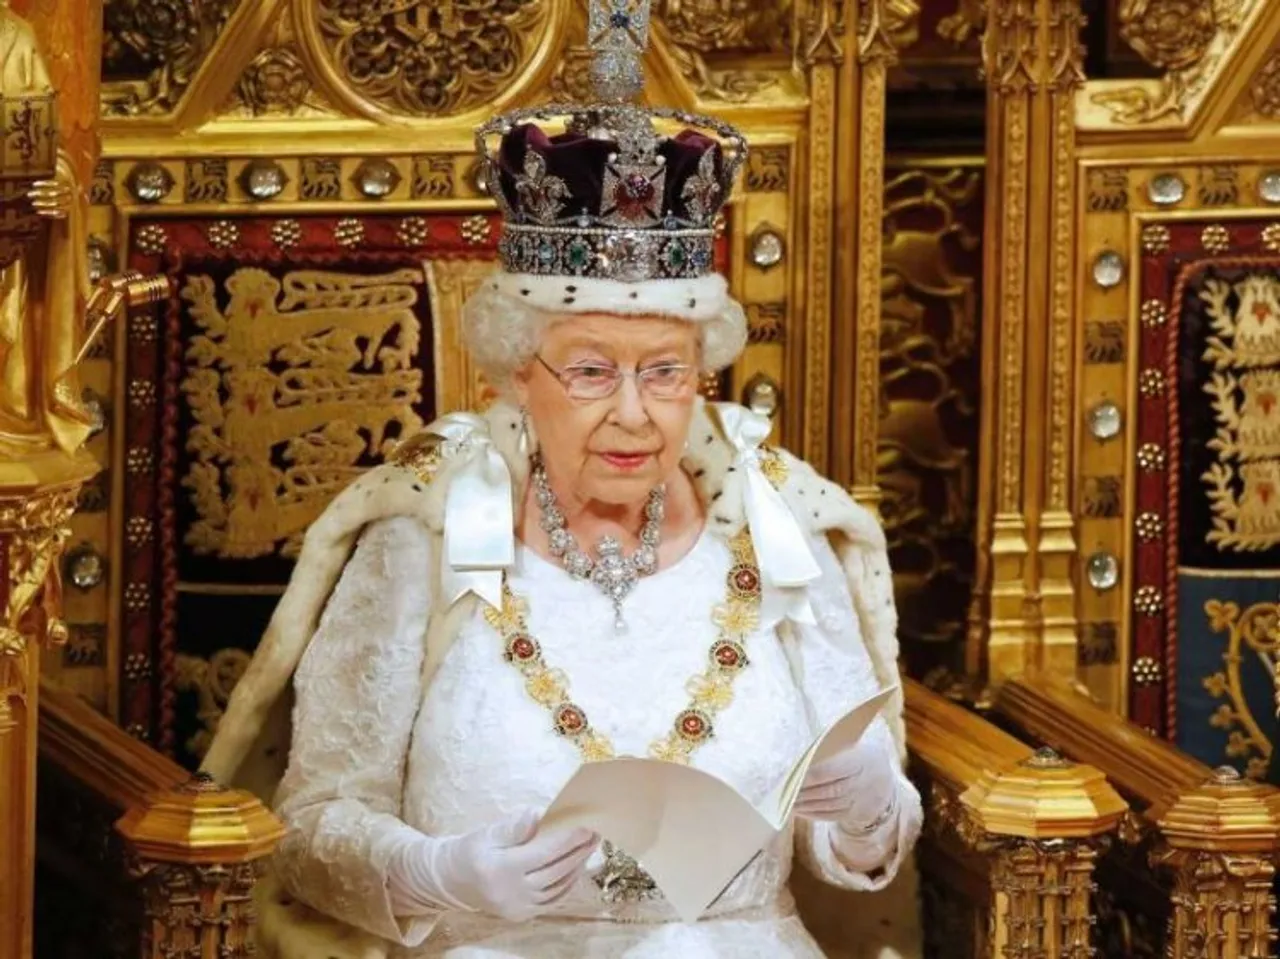 Queen Elizabeth wearing the Royal Crown which has the Kohinoor diamond stolen from India (file photo)